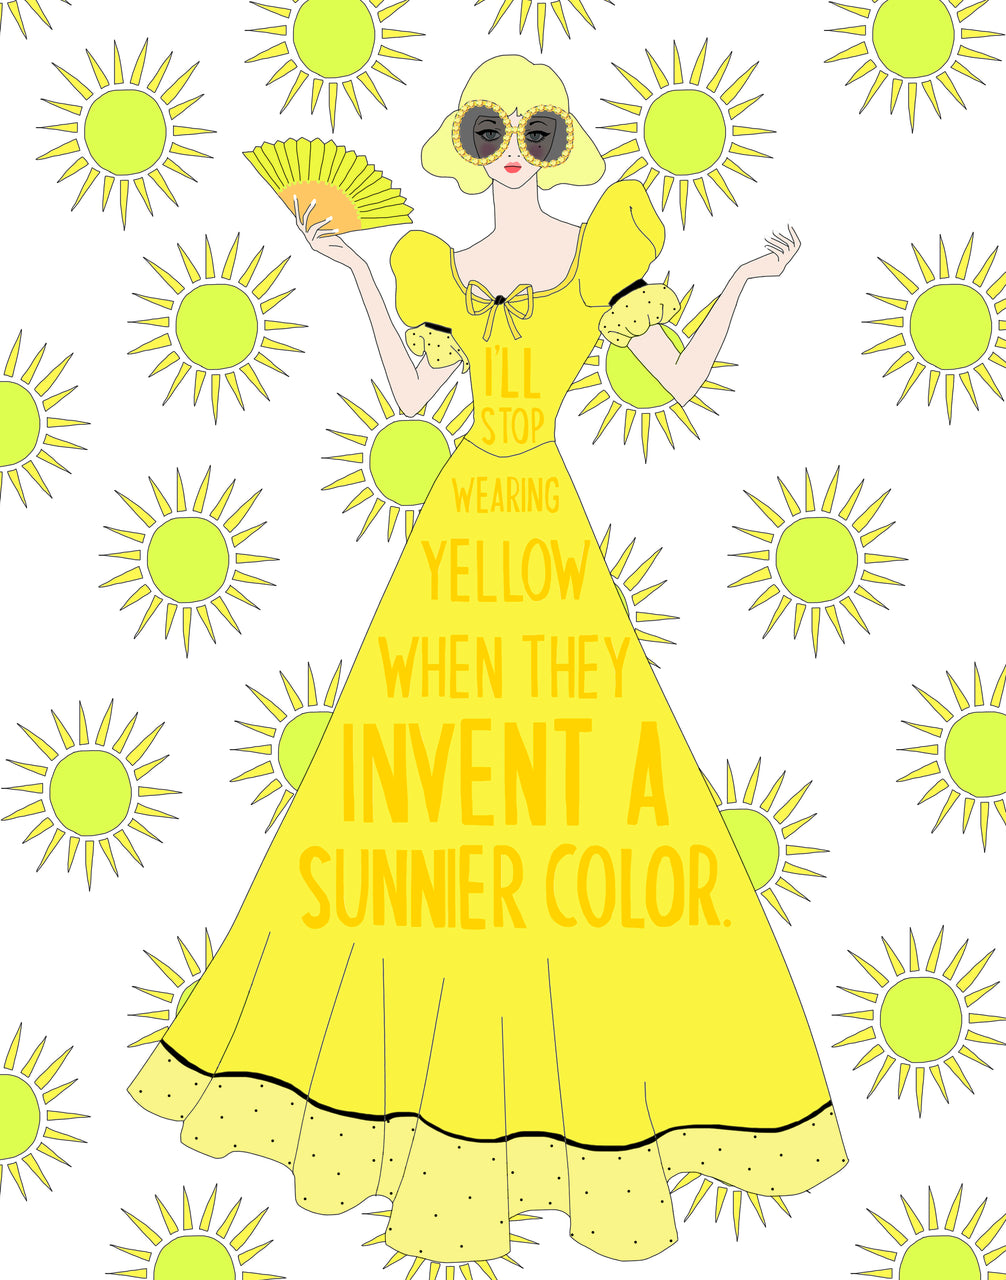 I'll Stop Wearing Yellow When They Invent a Sunnier Color. (PRINT)